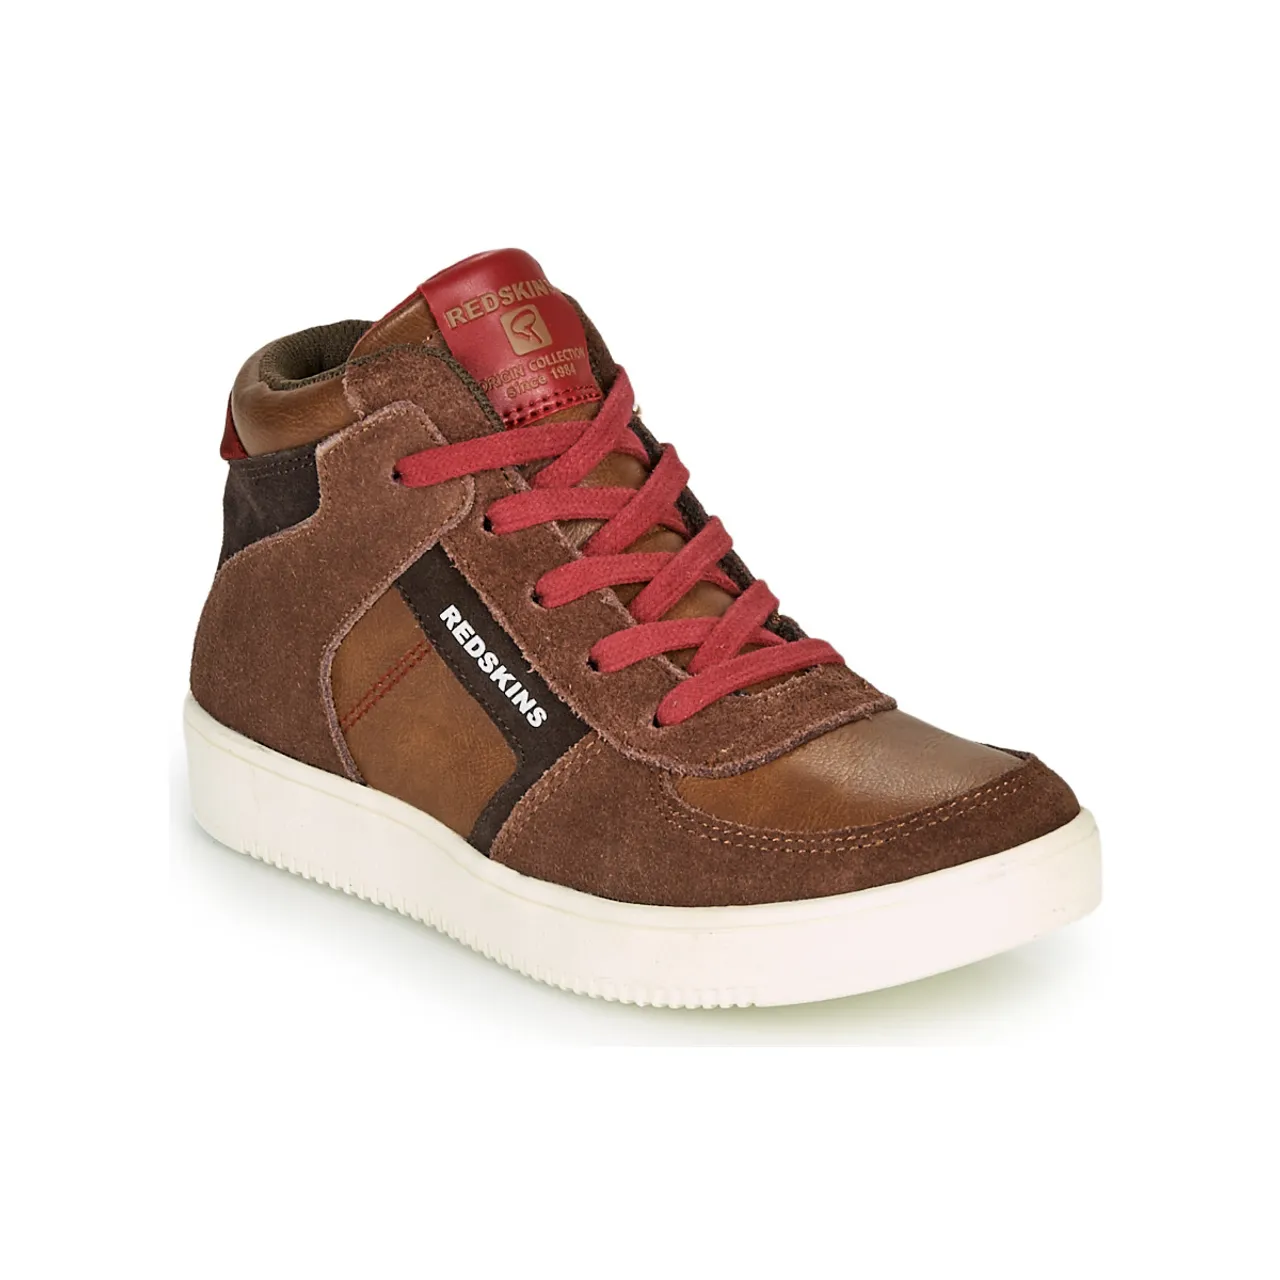 Redskins  LAVAL KID  boys's Children's Shoes (High-top Trainers) in Brown